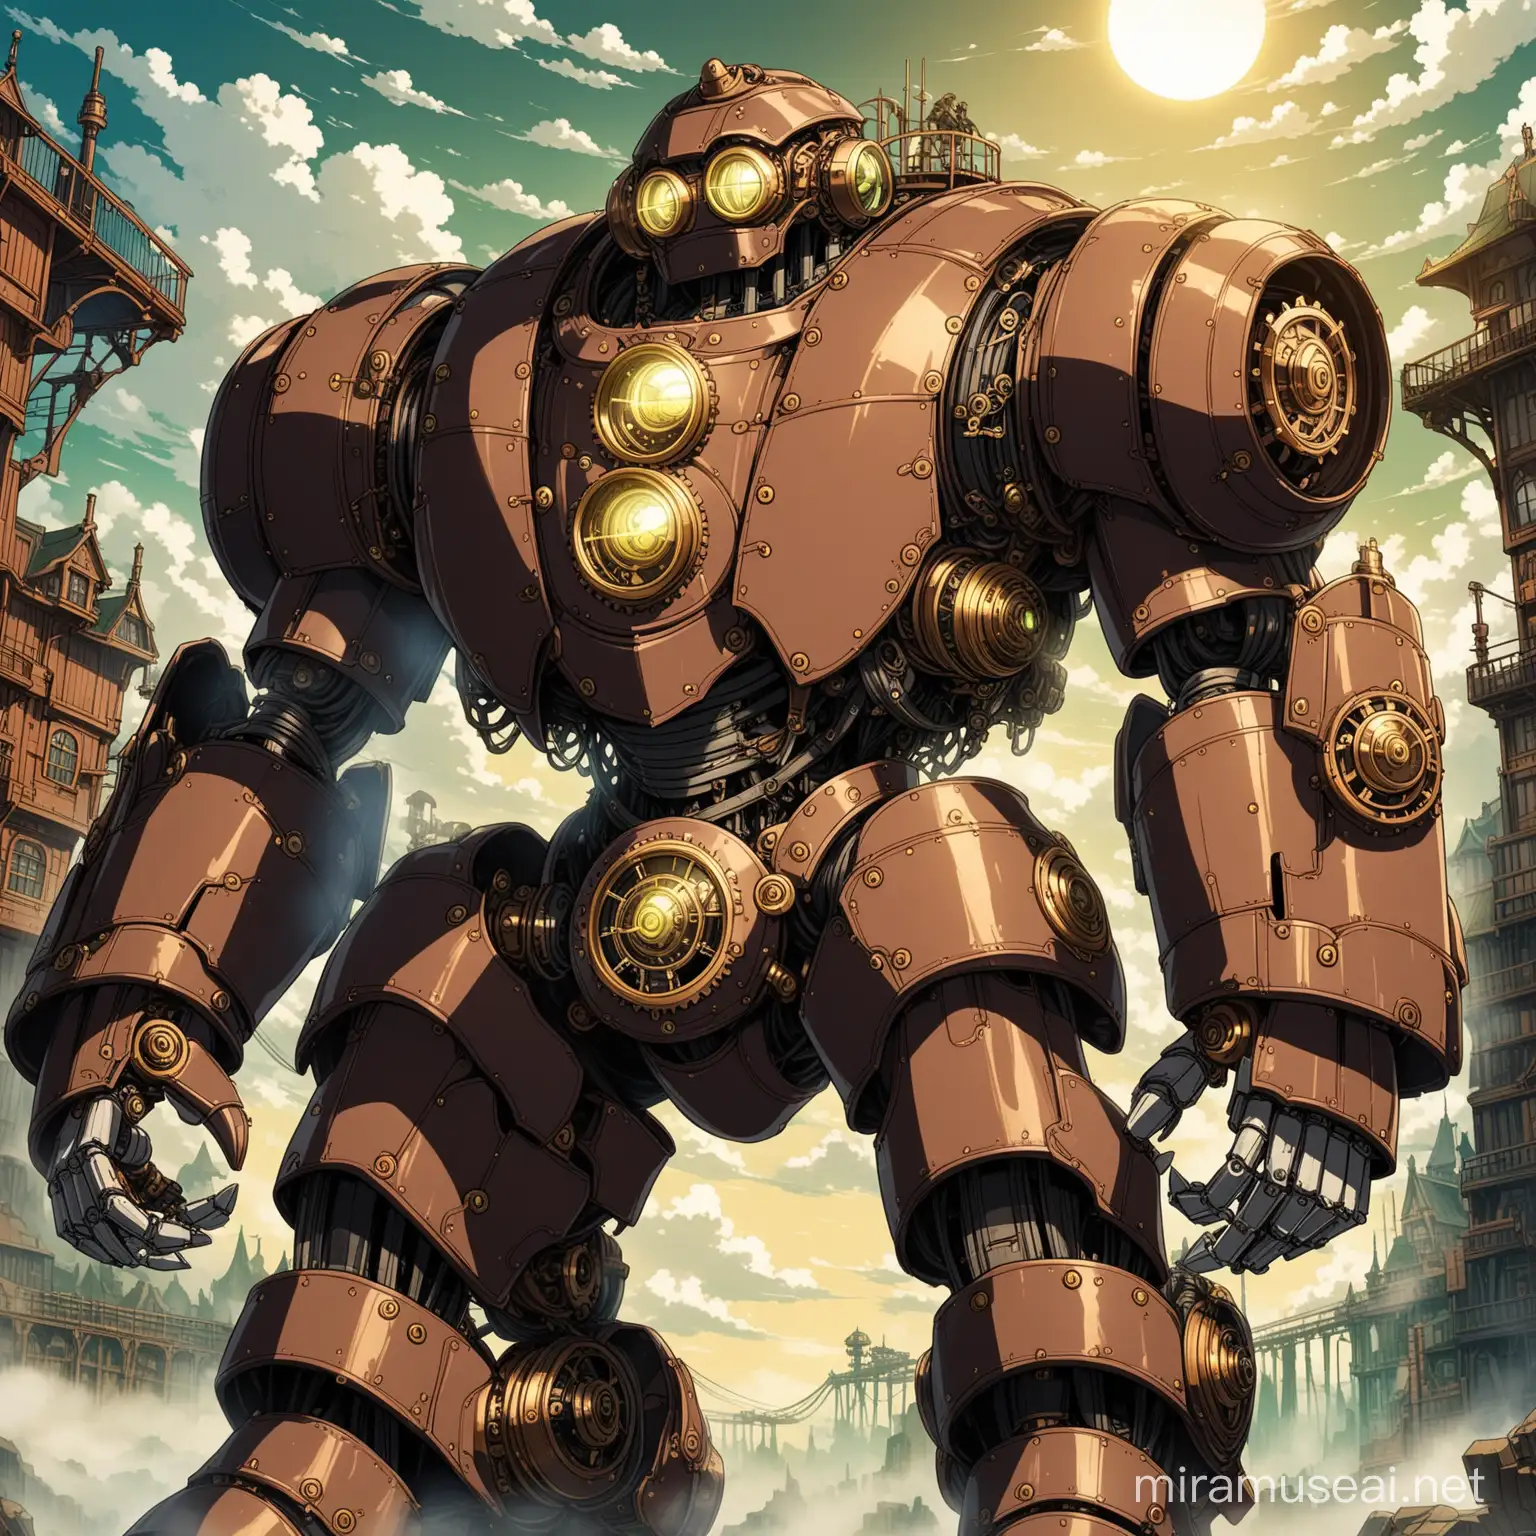 Steampunk Mechanical Golem in Anime Style